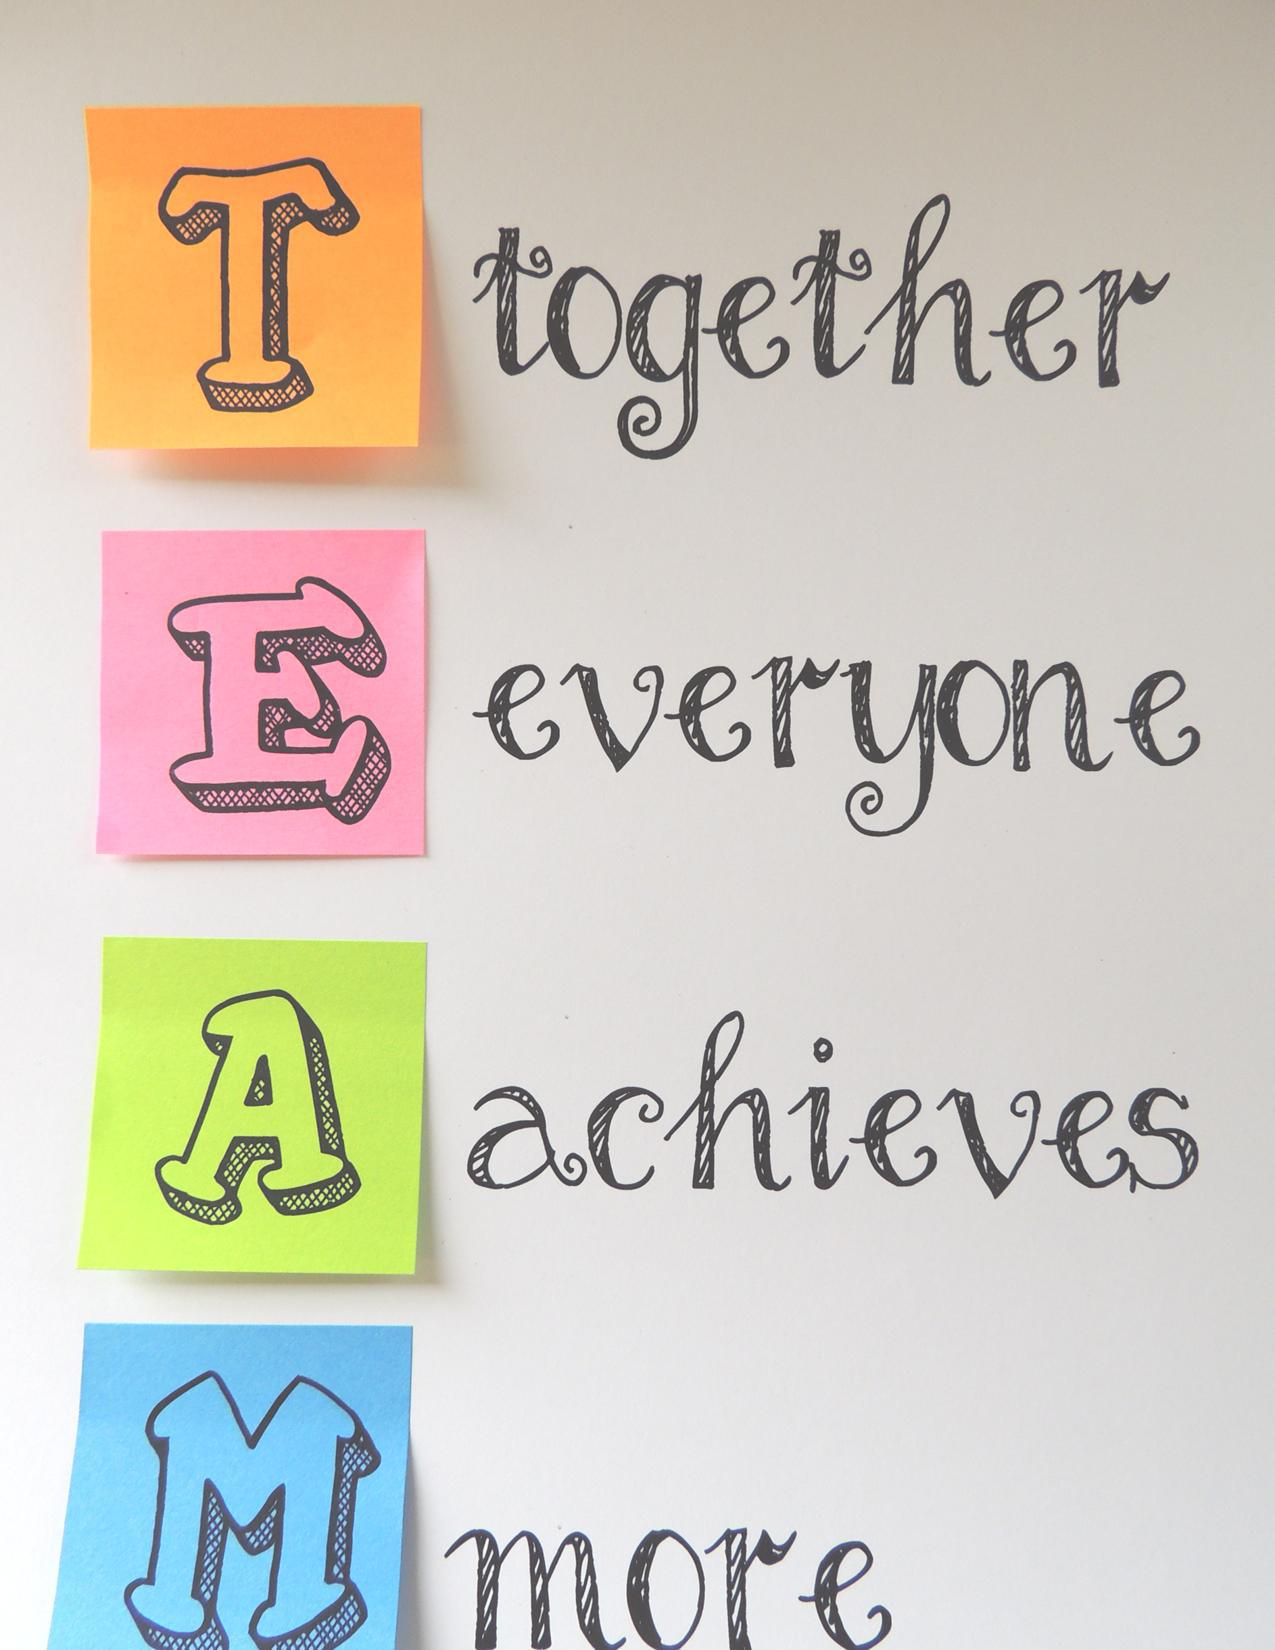 TEAM- together everyone achieves more.